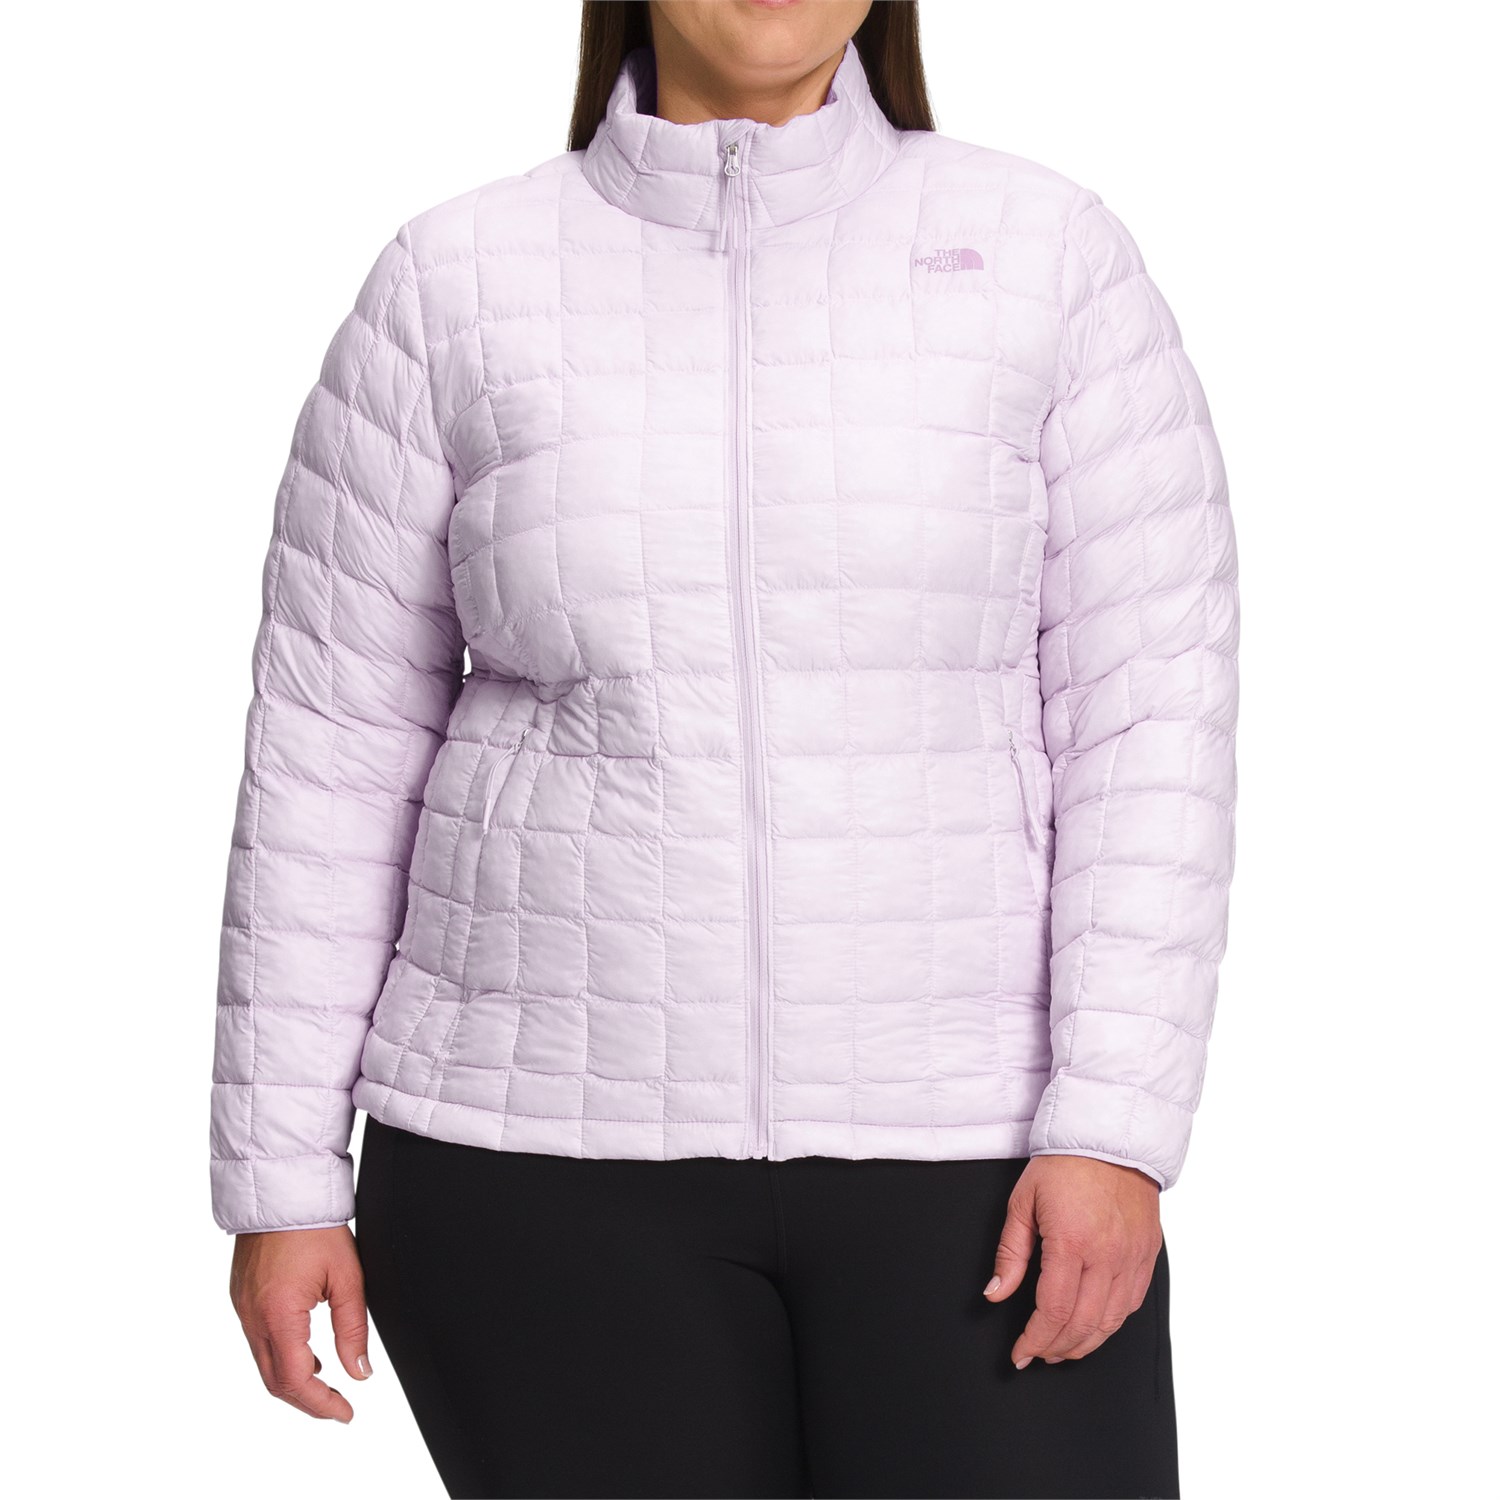 Куртка The North Face ThermoBall Eco 2.0 Plus, цвет Lavender Fog худи the north face thermoball eco 2 0 plus цвет lavender fog